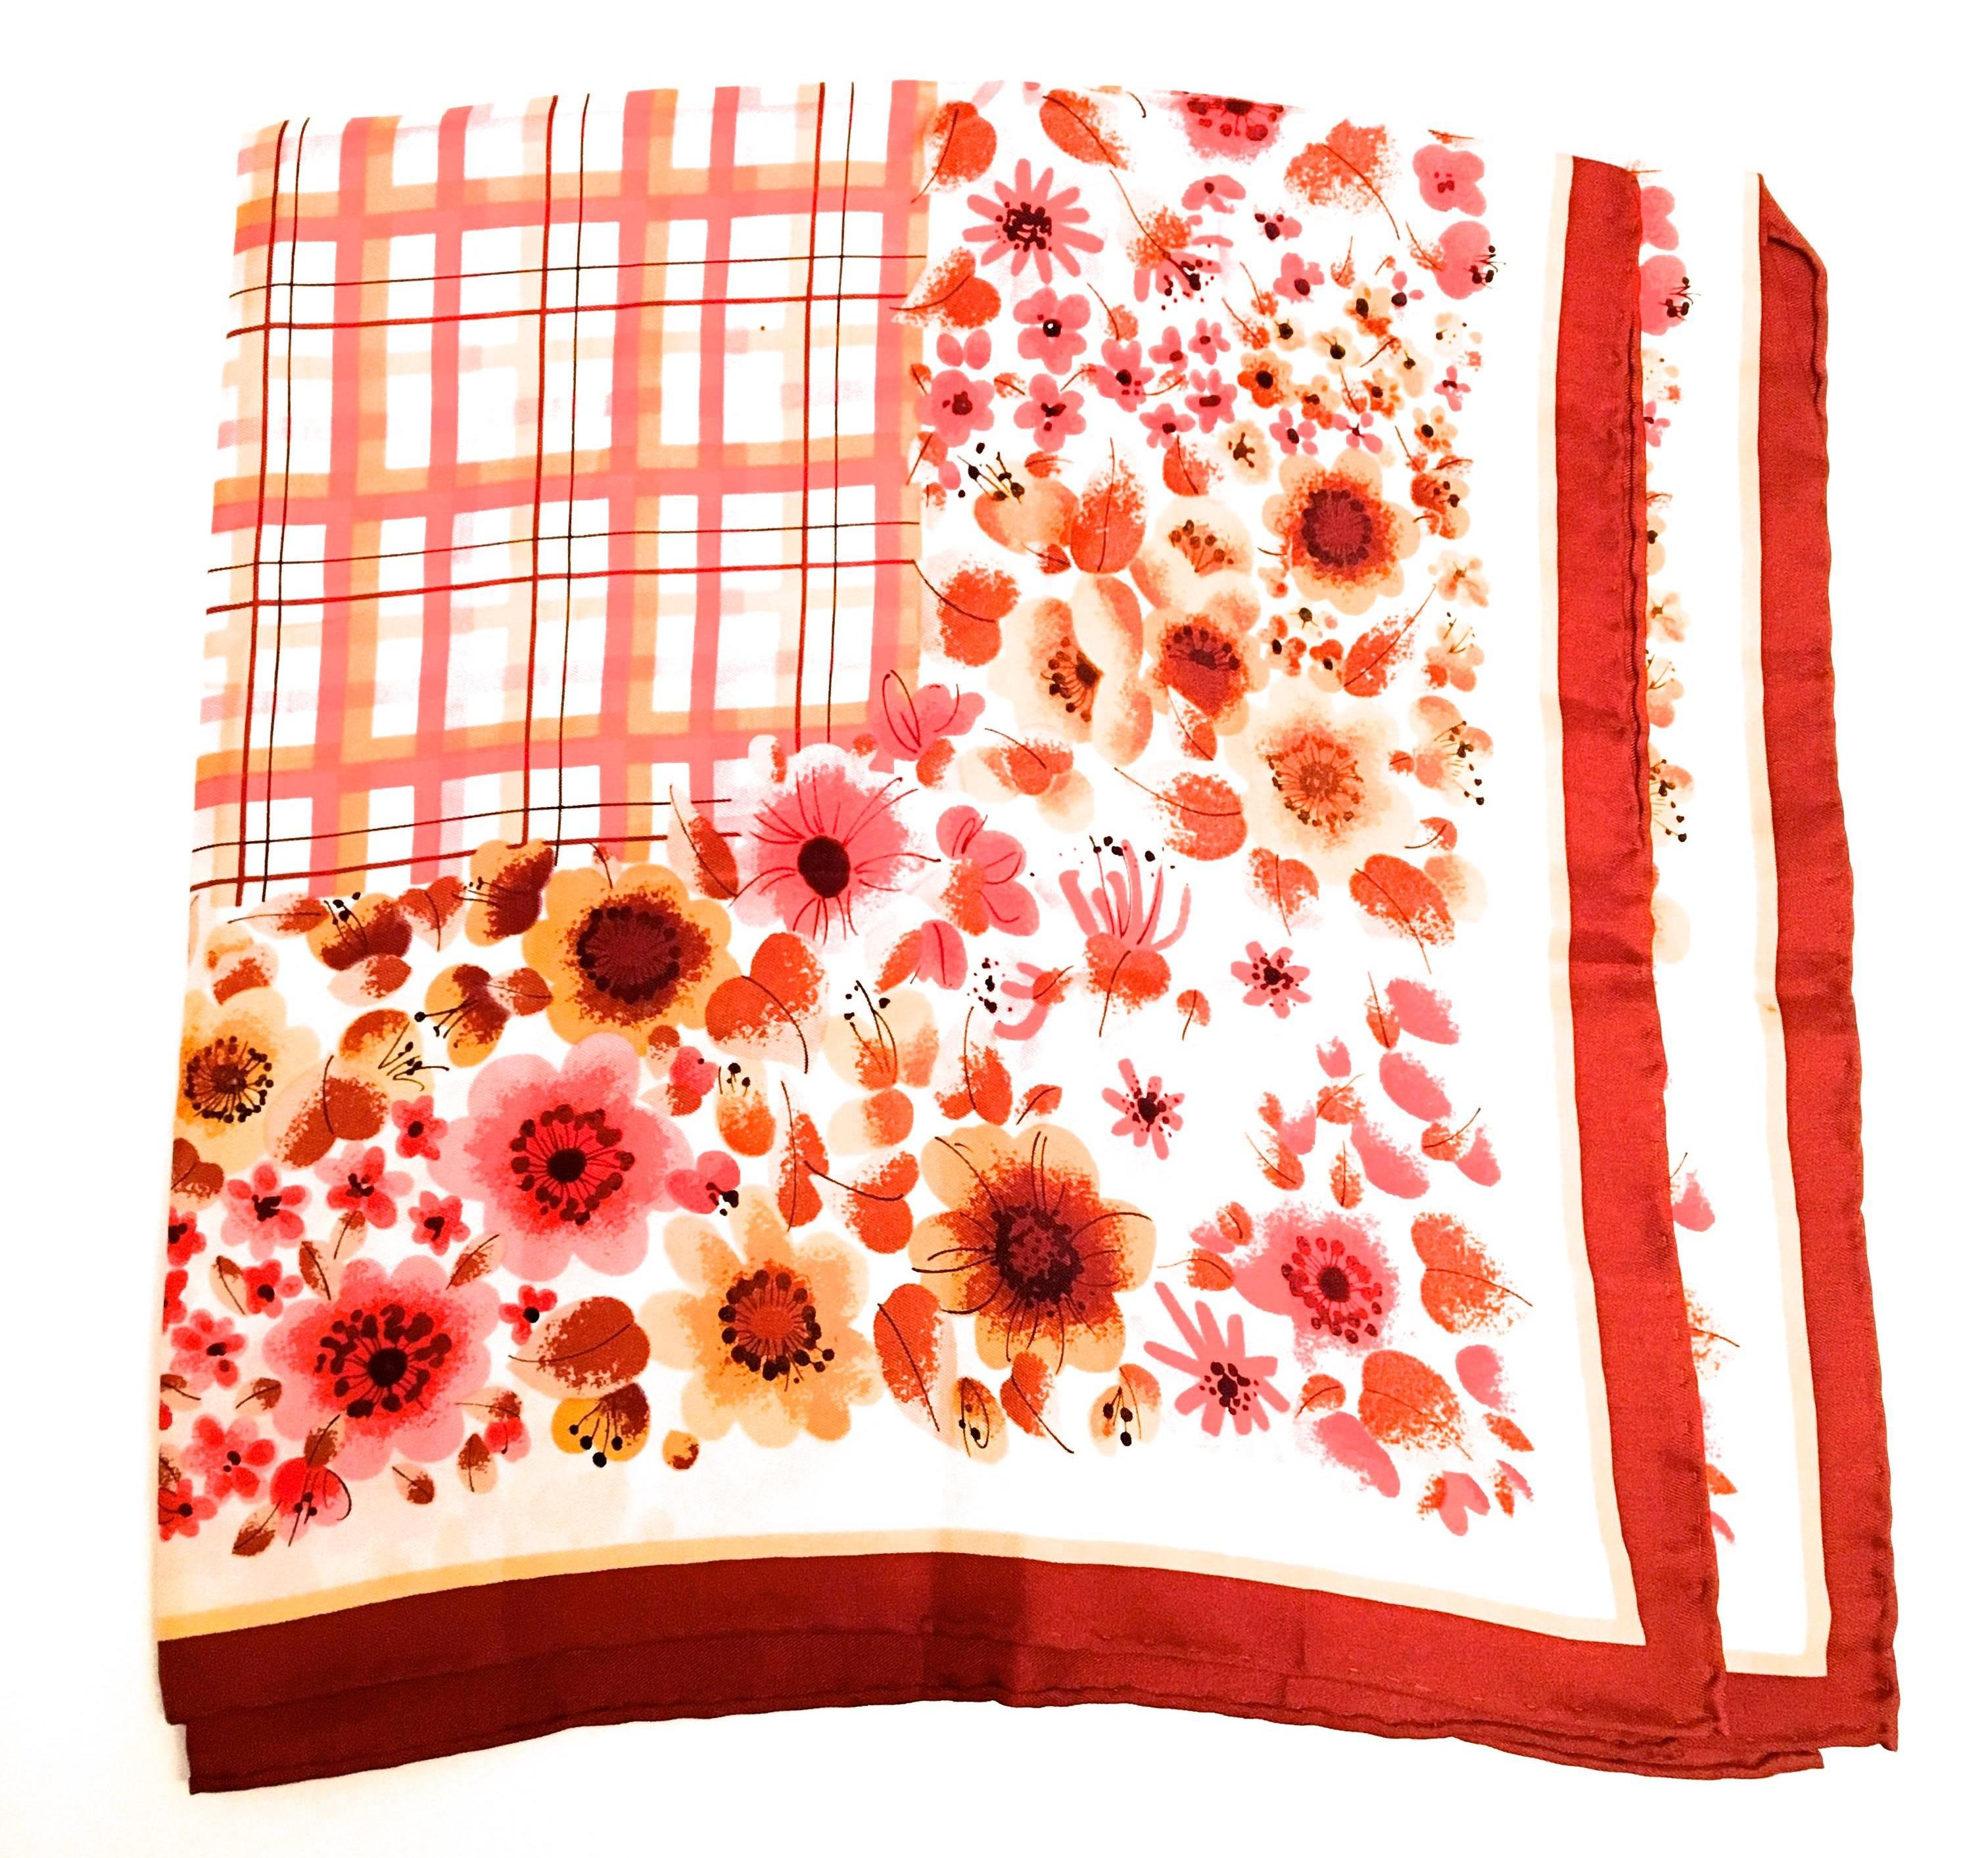 Presented here is a vintage scarf from Emanuel Ungaro. This beautiful hand rolled scarf is from the 1970's. It is comprised of a floral design with varying shades of red, brown, pink, yellow and black throughout. At the center of the scarf there is